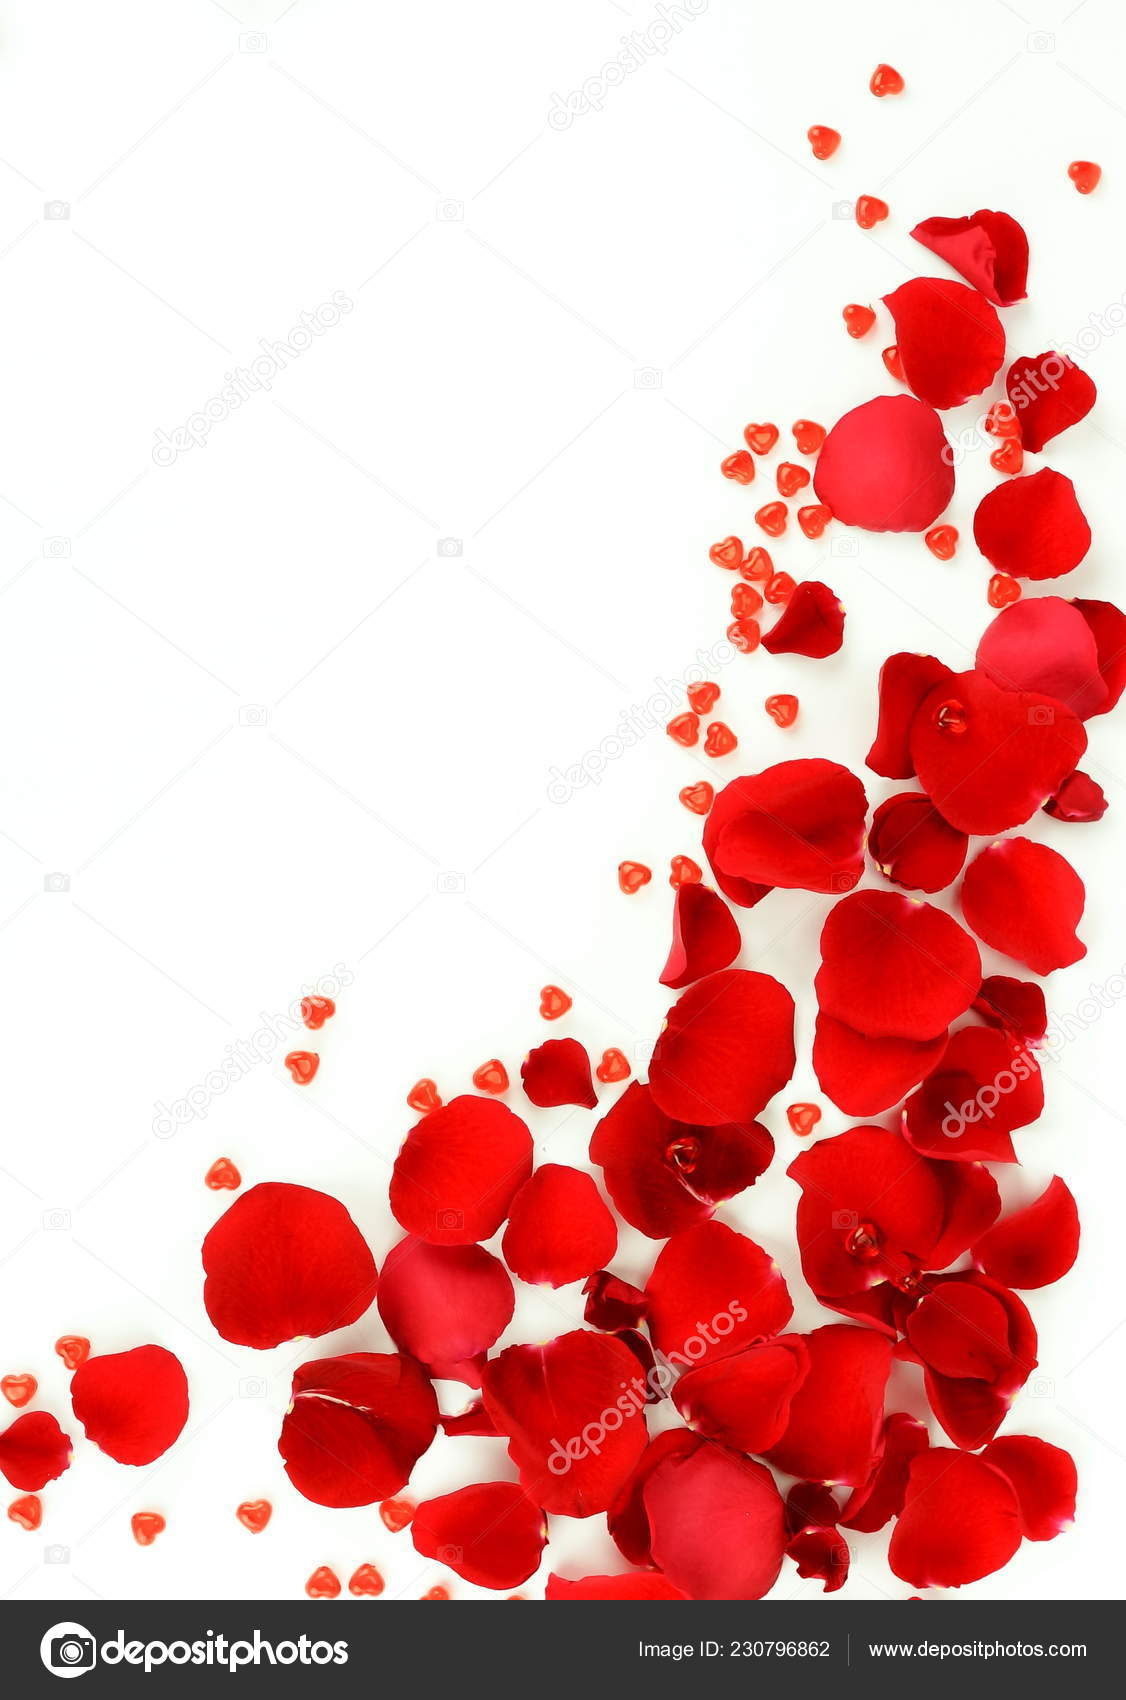 Flowers Background Red Roses Petals Red Small Hearts White